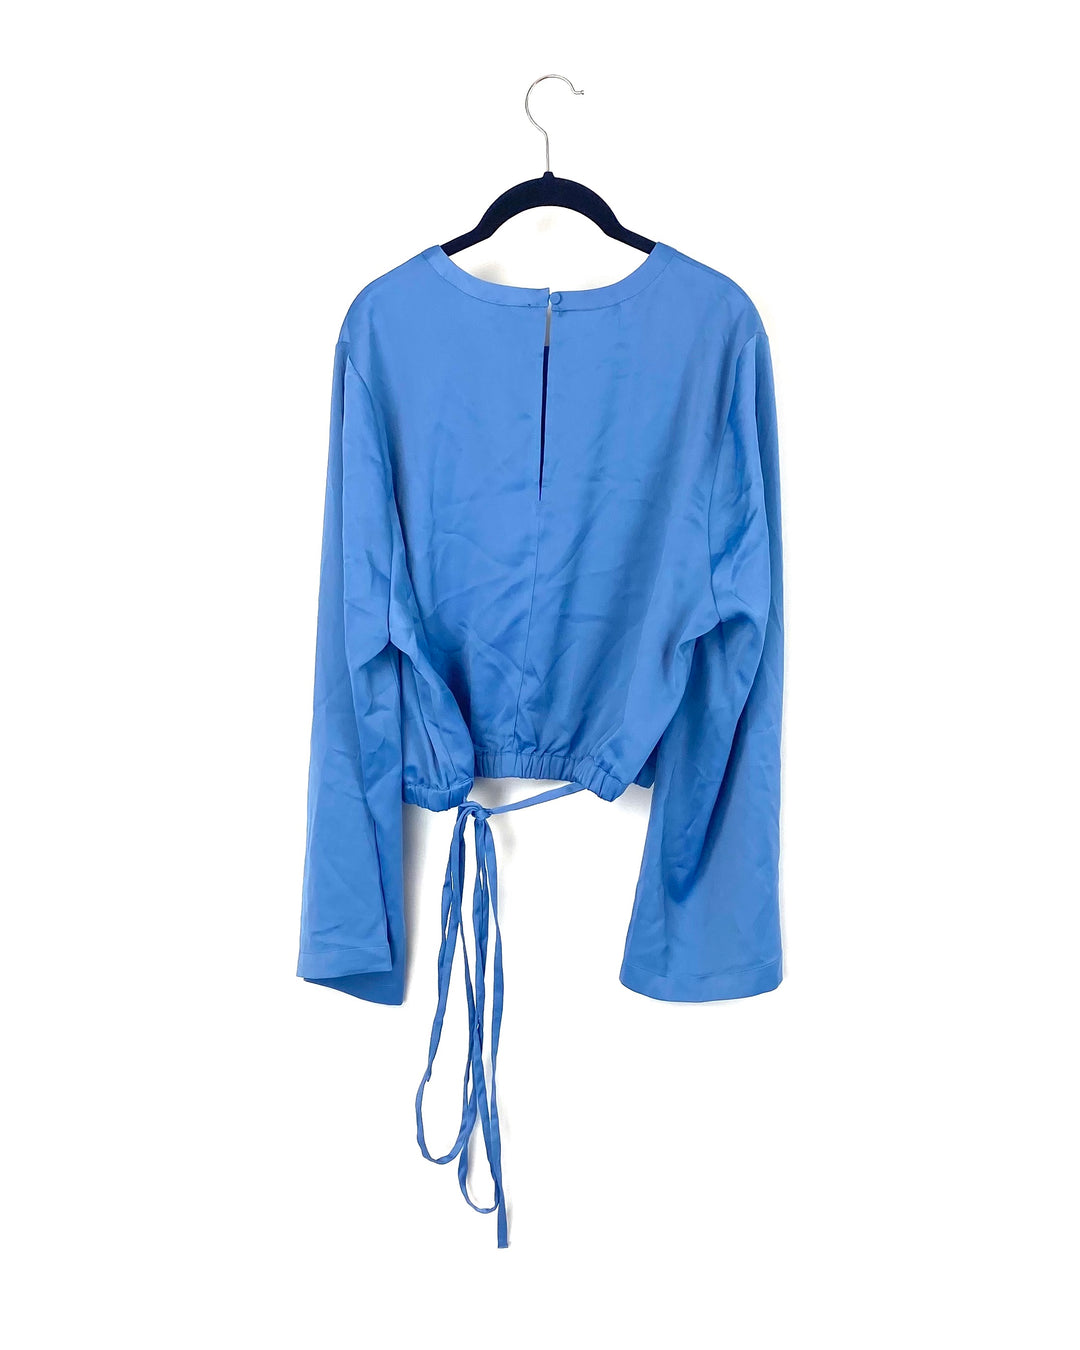 Blue Long Sleeve Top - Size 12, 14 and 26/28